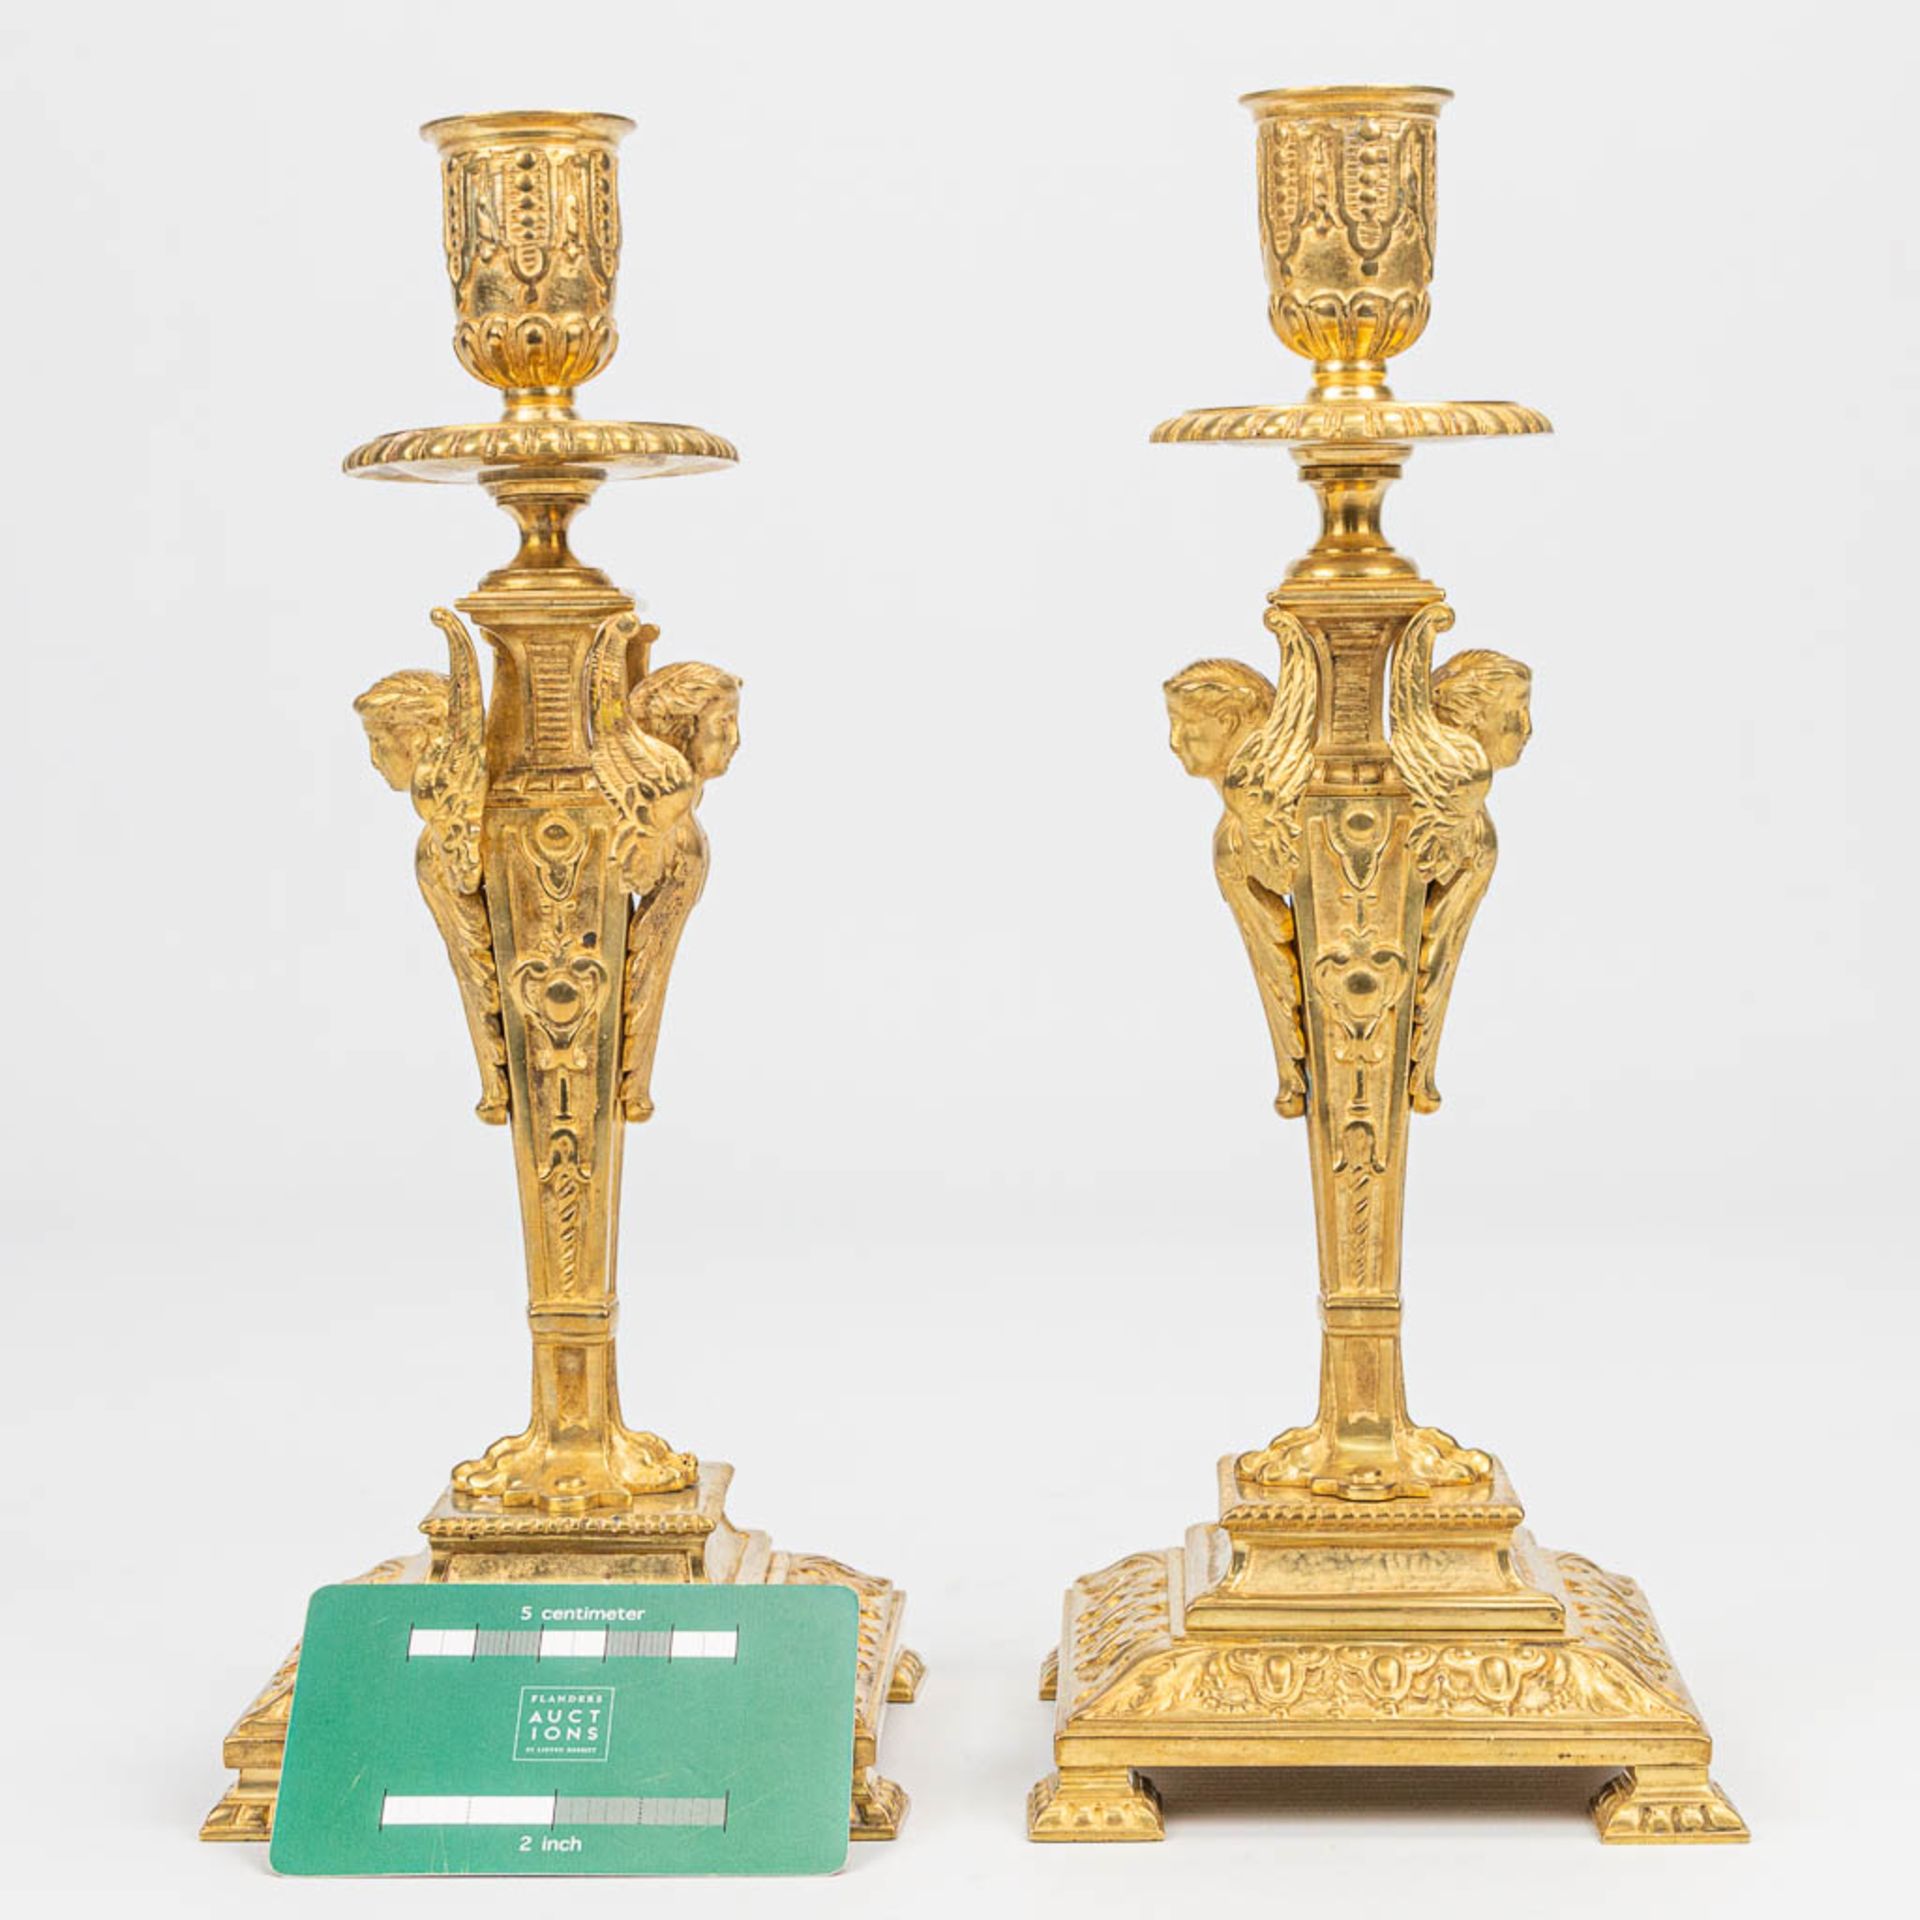 a pair of gilt Napoleon 3 bronze candlesticks, decorated with angels. (11 x 11 x 26,5 cm) - Image 3 of 6